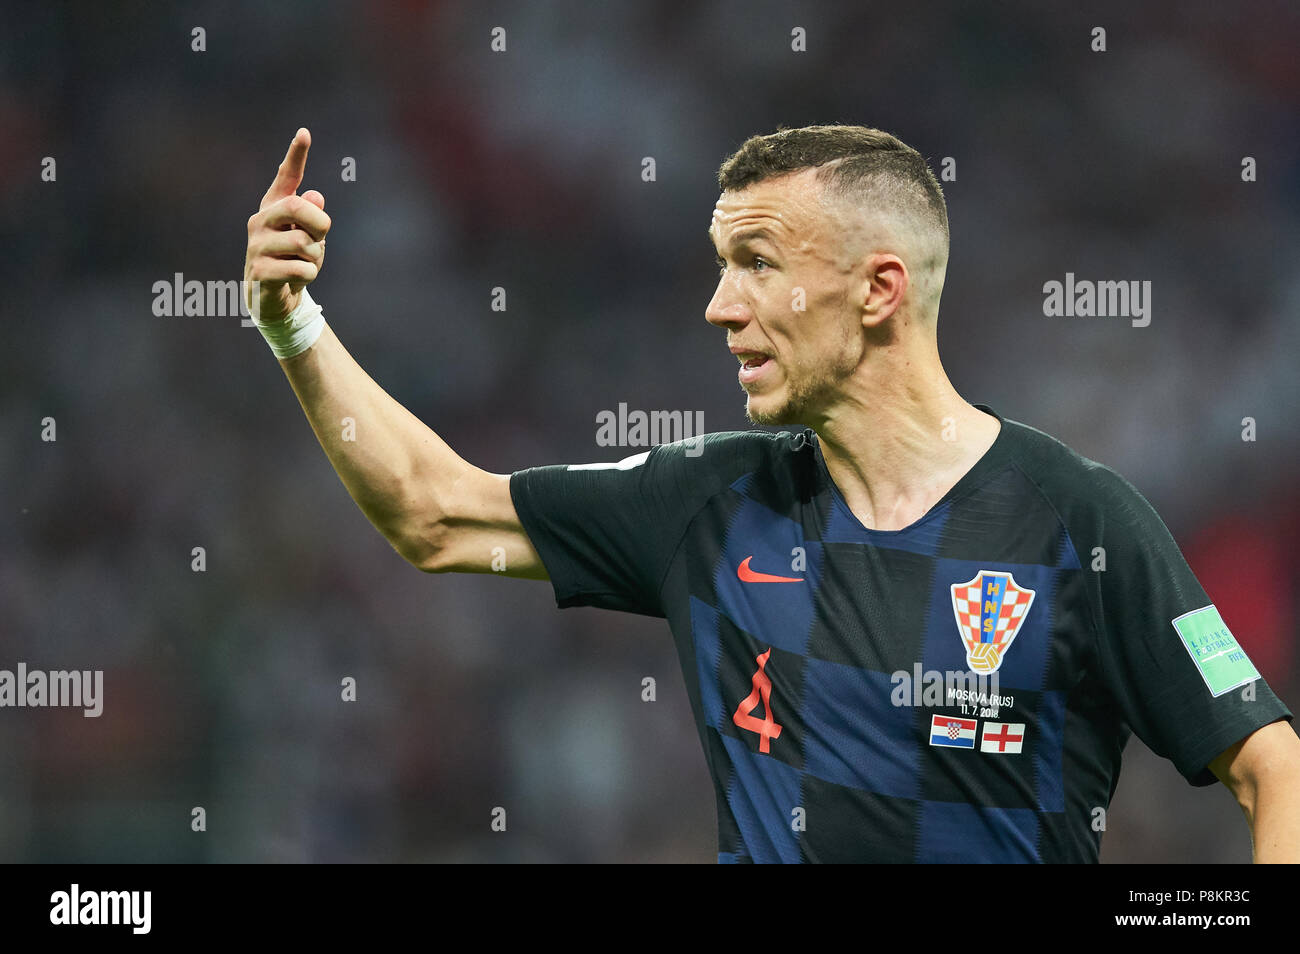 England - Croatia, Soccer, Moscow, July 11, 2018 Ivan PERISIC, Croatia Nr.4 Gesticulates and giving instructions, action, single image, gesture, gesture, hand movement, pointing, interpret, mimik,  ENGLAND  - CROATIA 1-2 Football FIFA WORLD CUP 2018 RUSSIA, Semifinal, Season 2018/2019,  July 11, 2018 in Moscow, Russia. © Peter Schatz / Alamy Live News Stock Photo